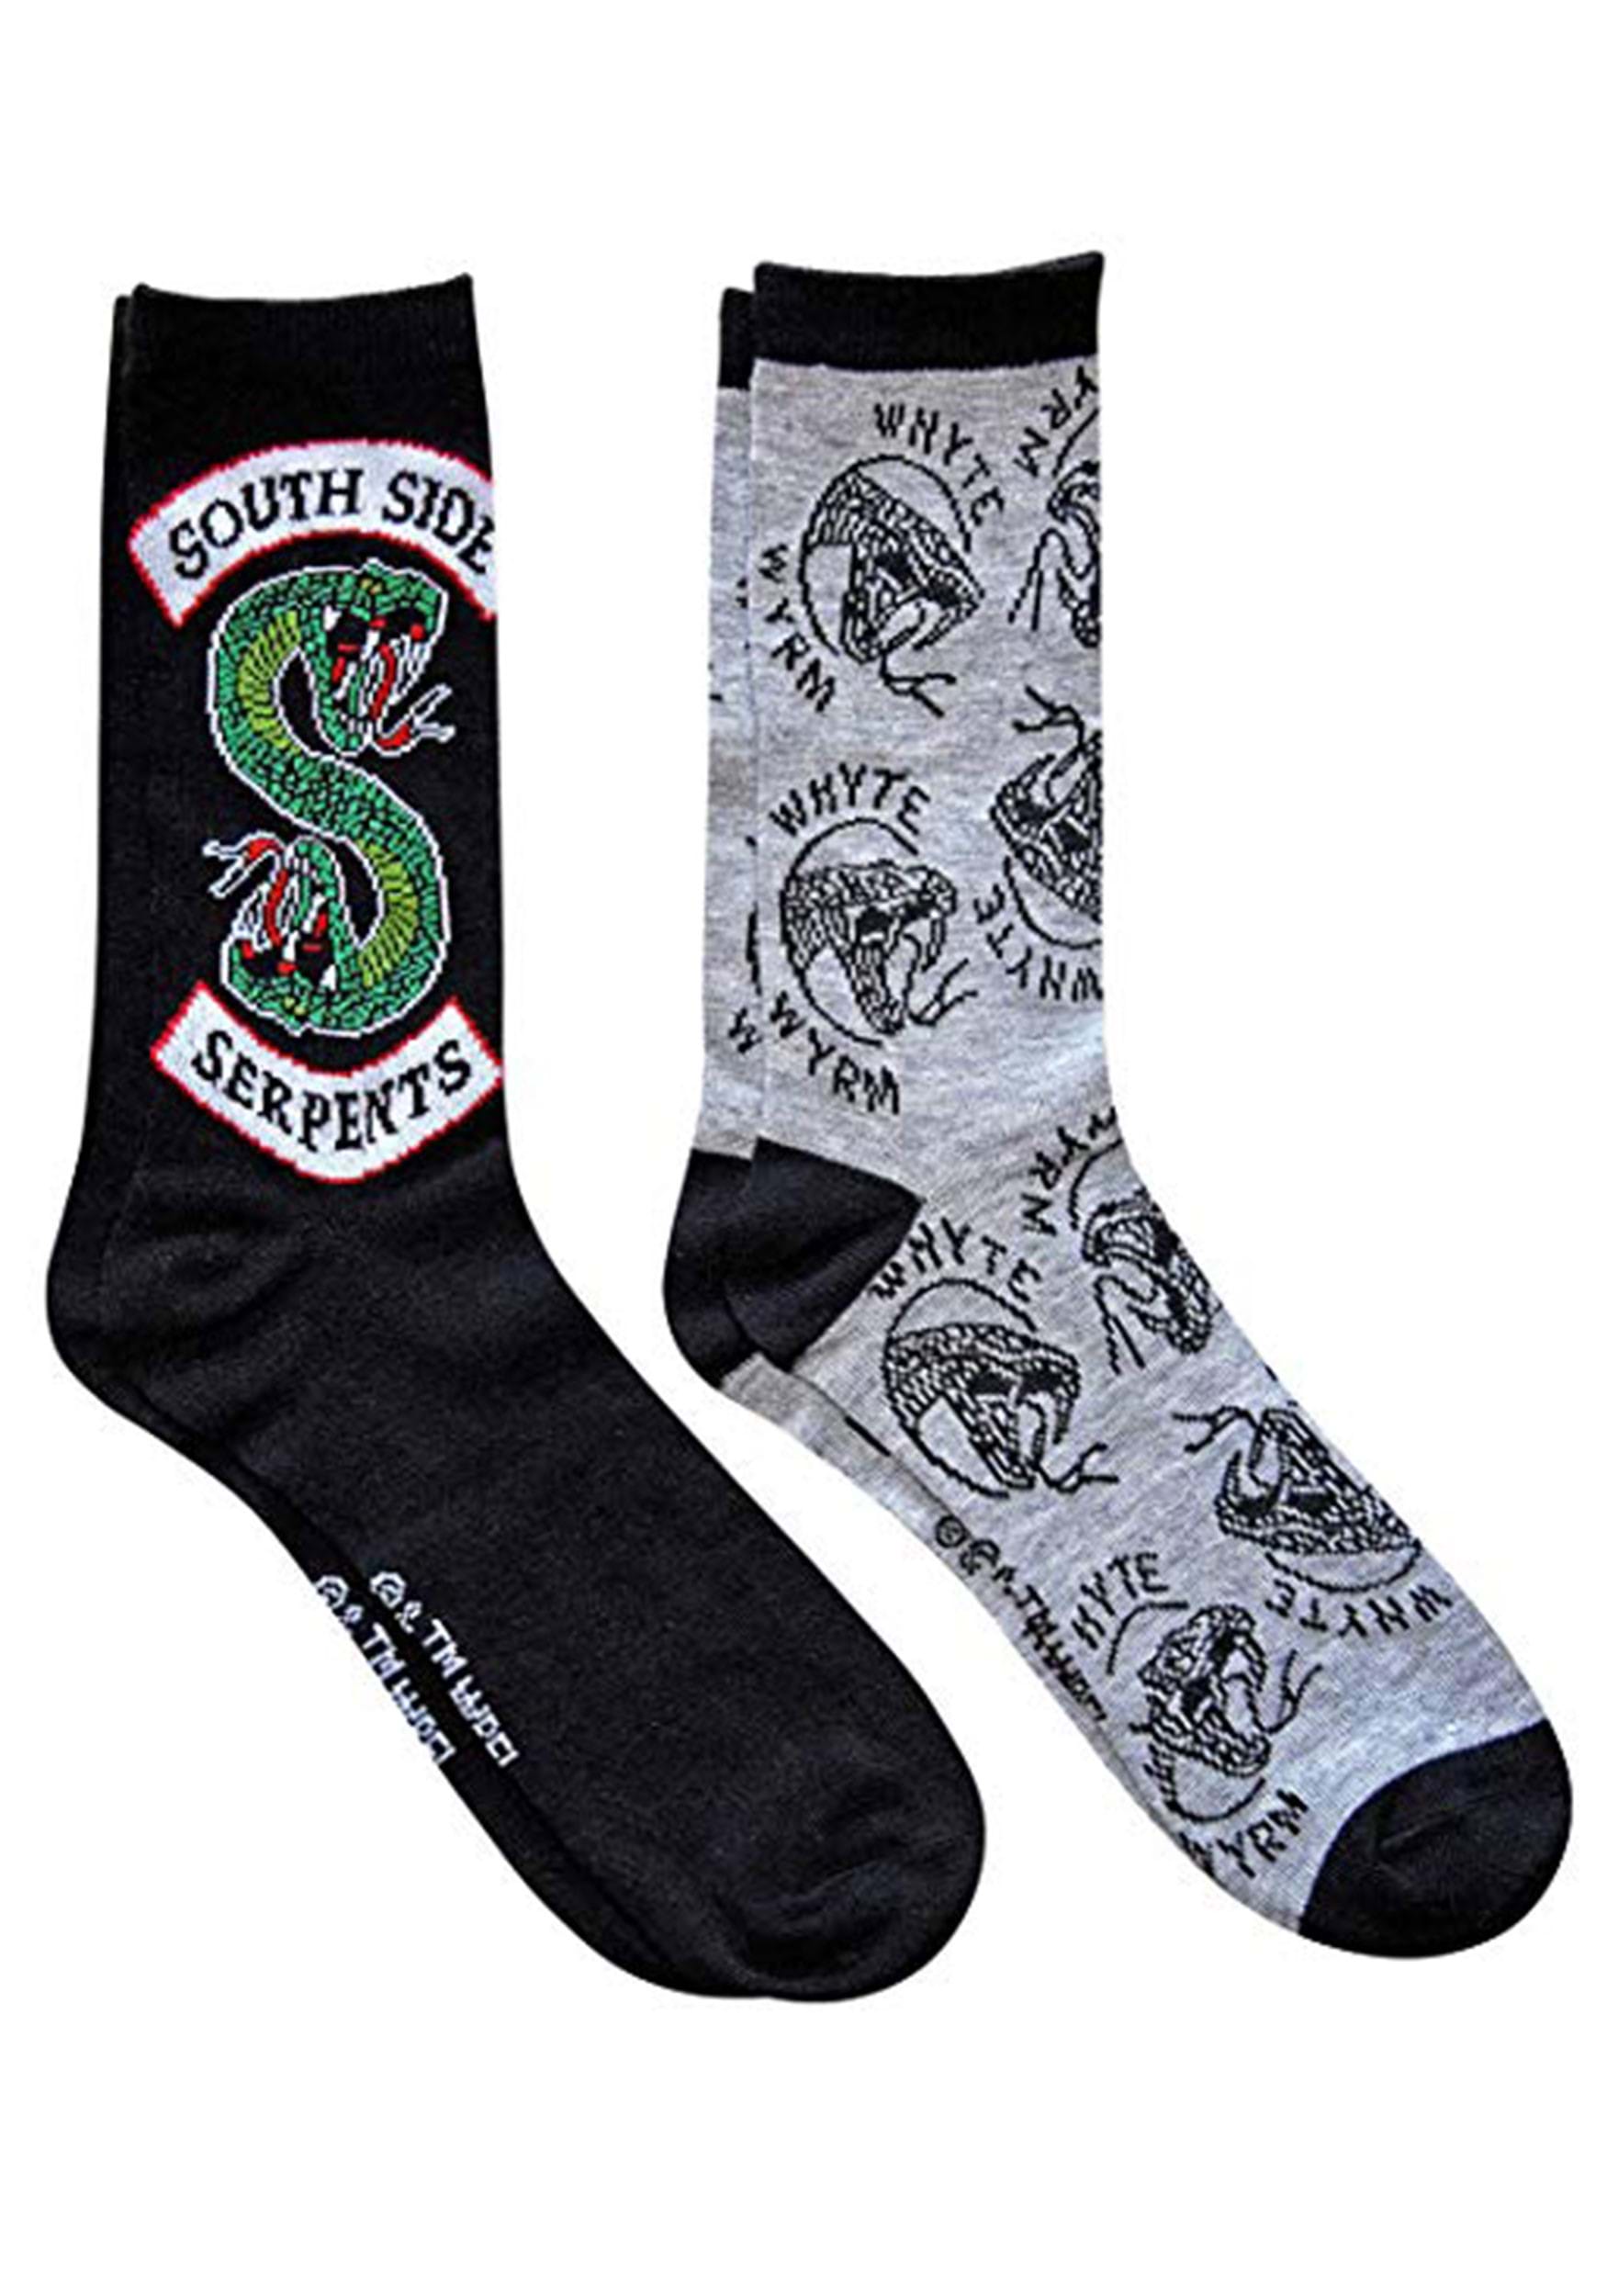 Riverdale South Side Serpents Black/Gray 2-Pack Socks for Adults